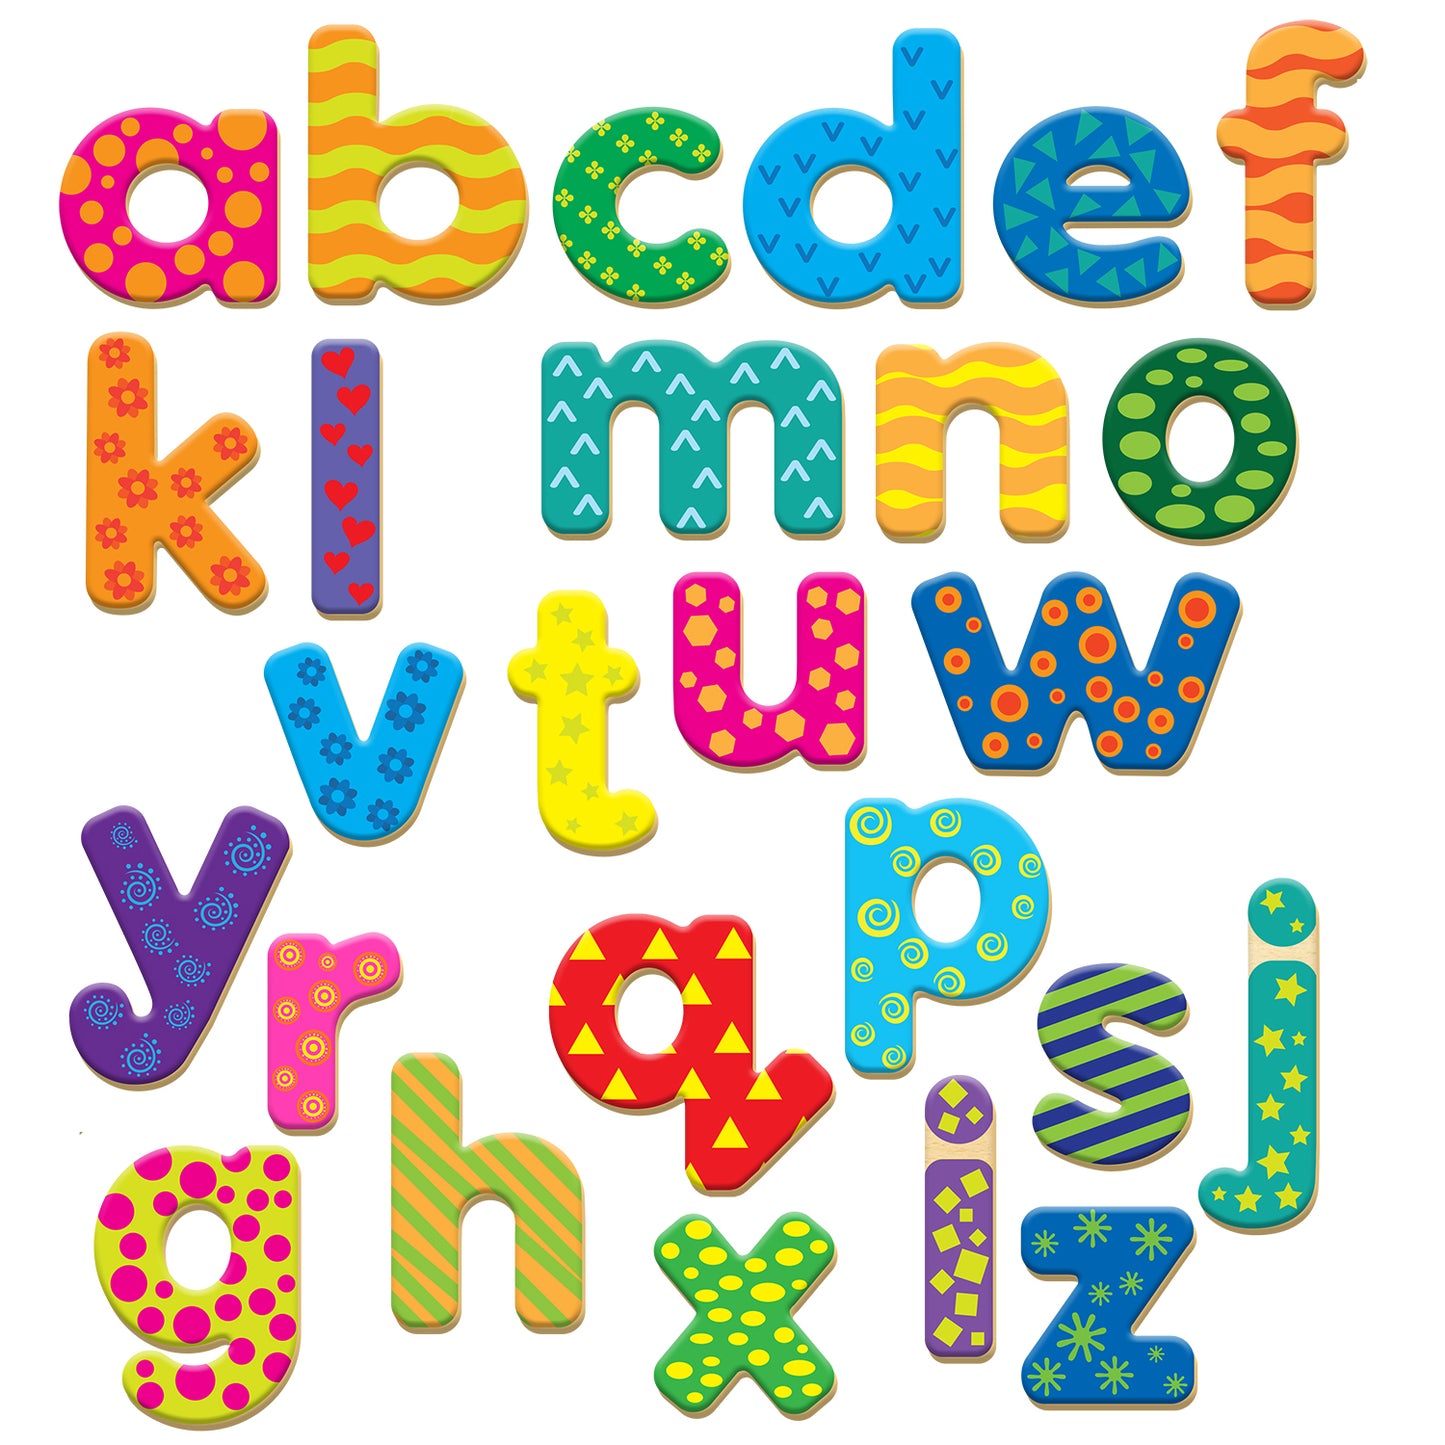 Magnetic Letters Lowercase